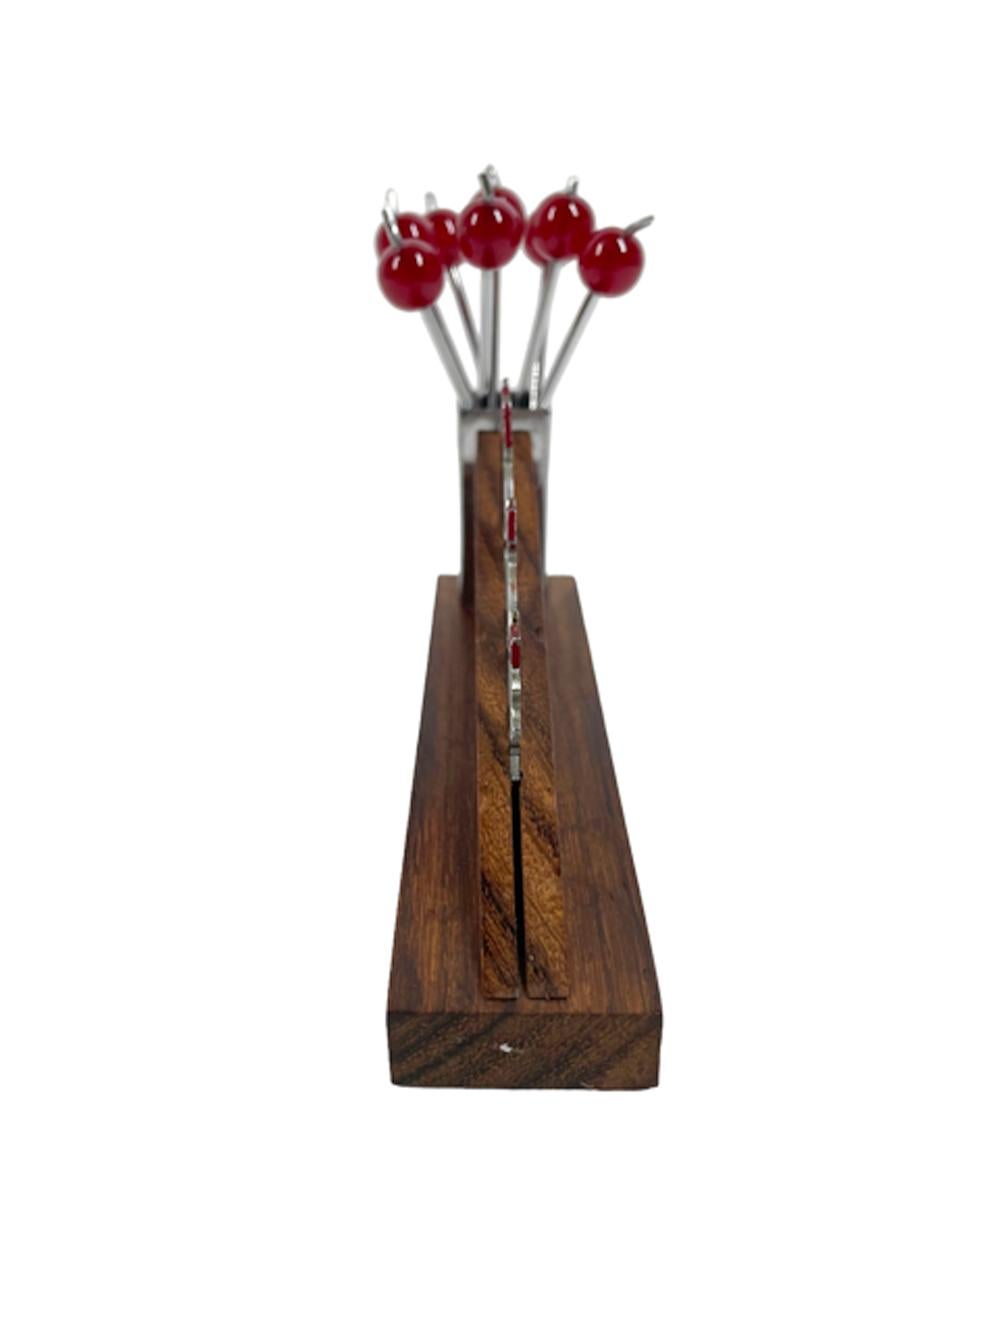 French Art Deco cocktail pick set in the manner of Sudre with 3 chrome ducks wearing hats walking up a ramp of wood carved as a block wall ending in a chrome post holding 8 fork tipped 